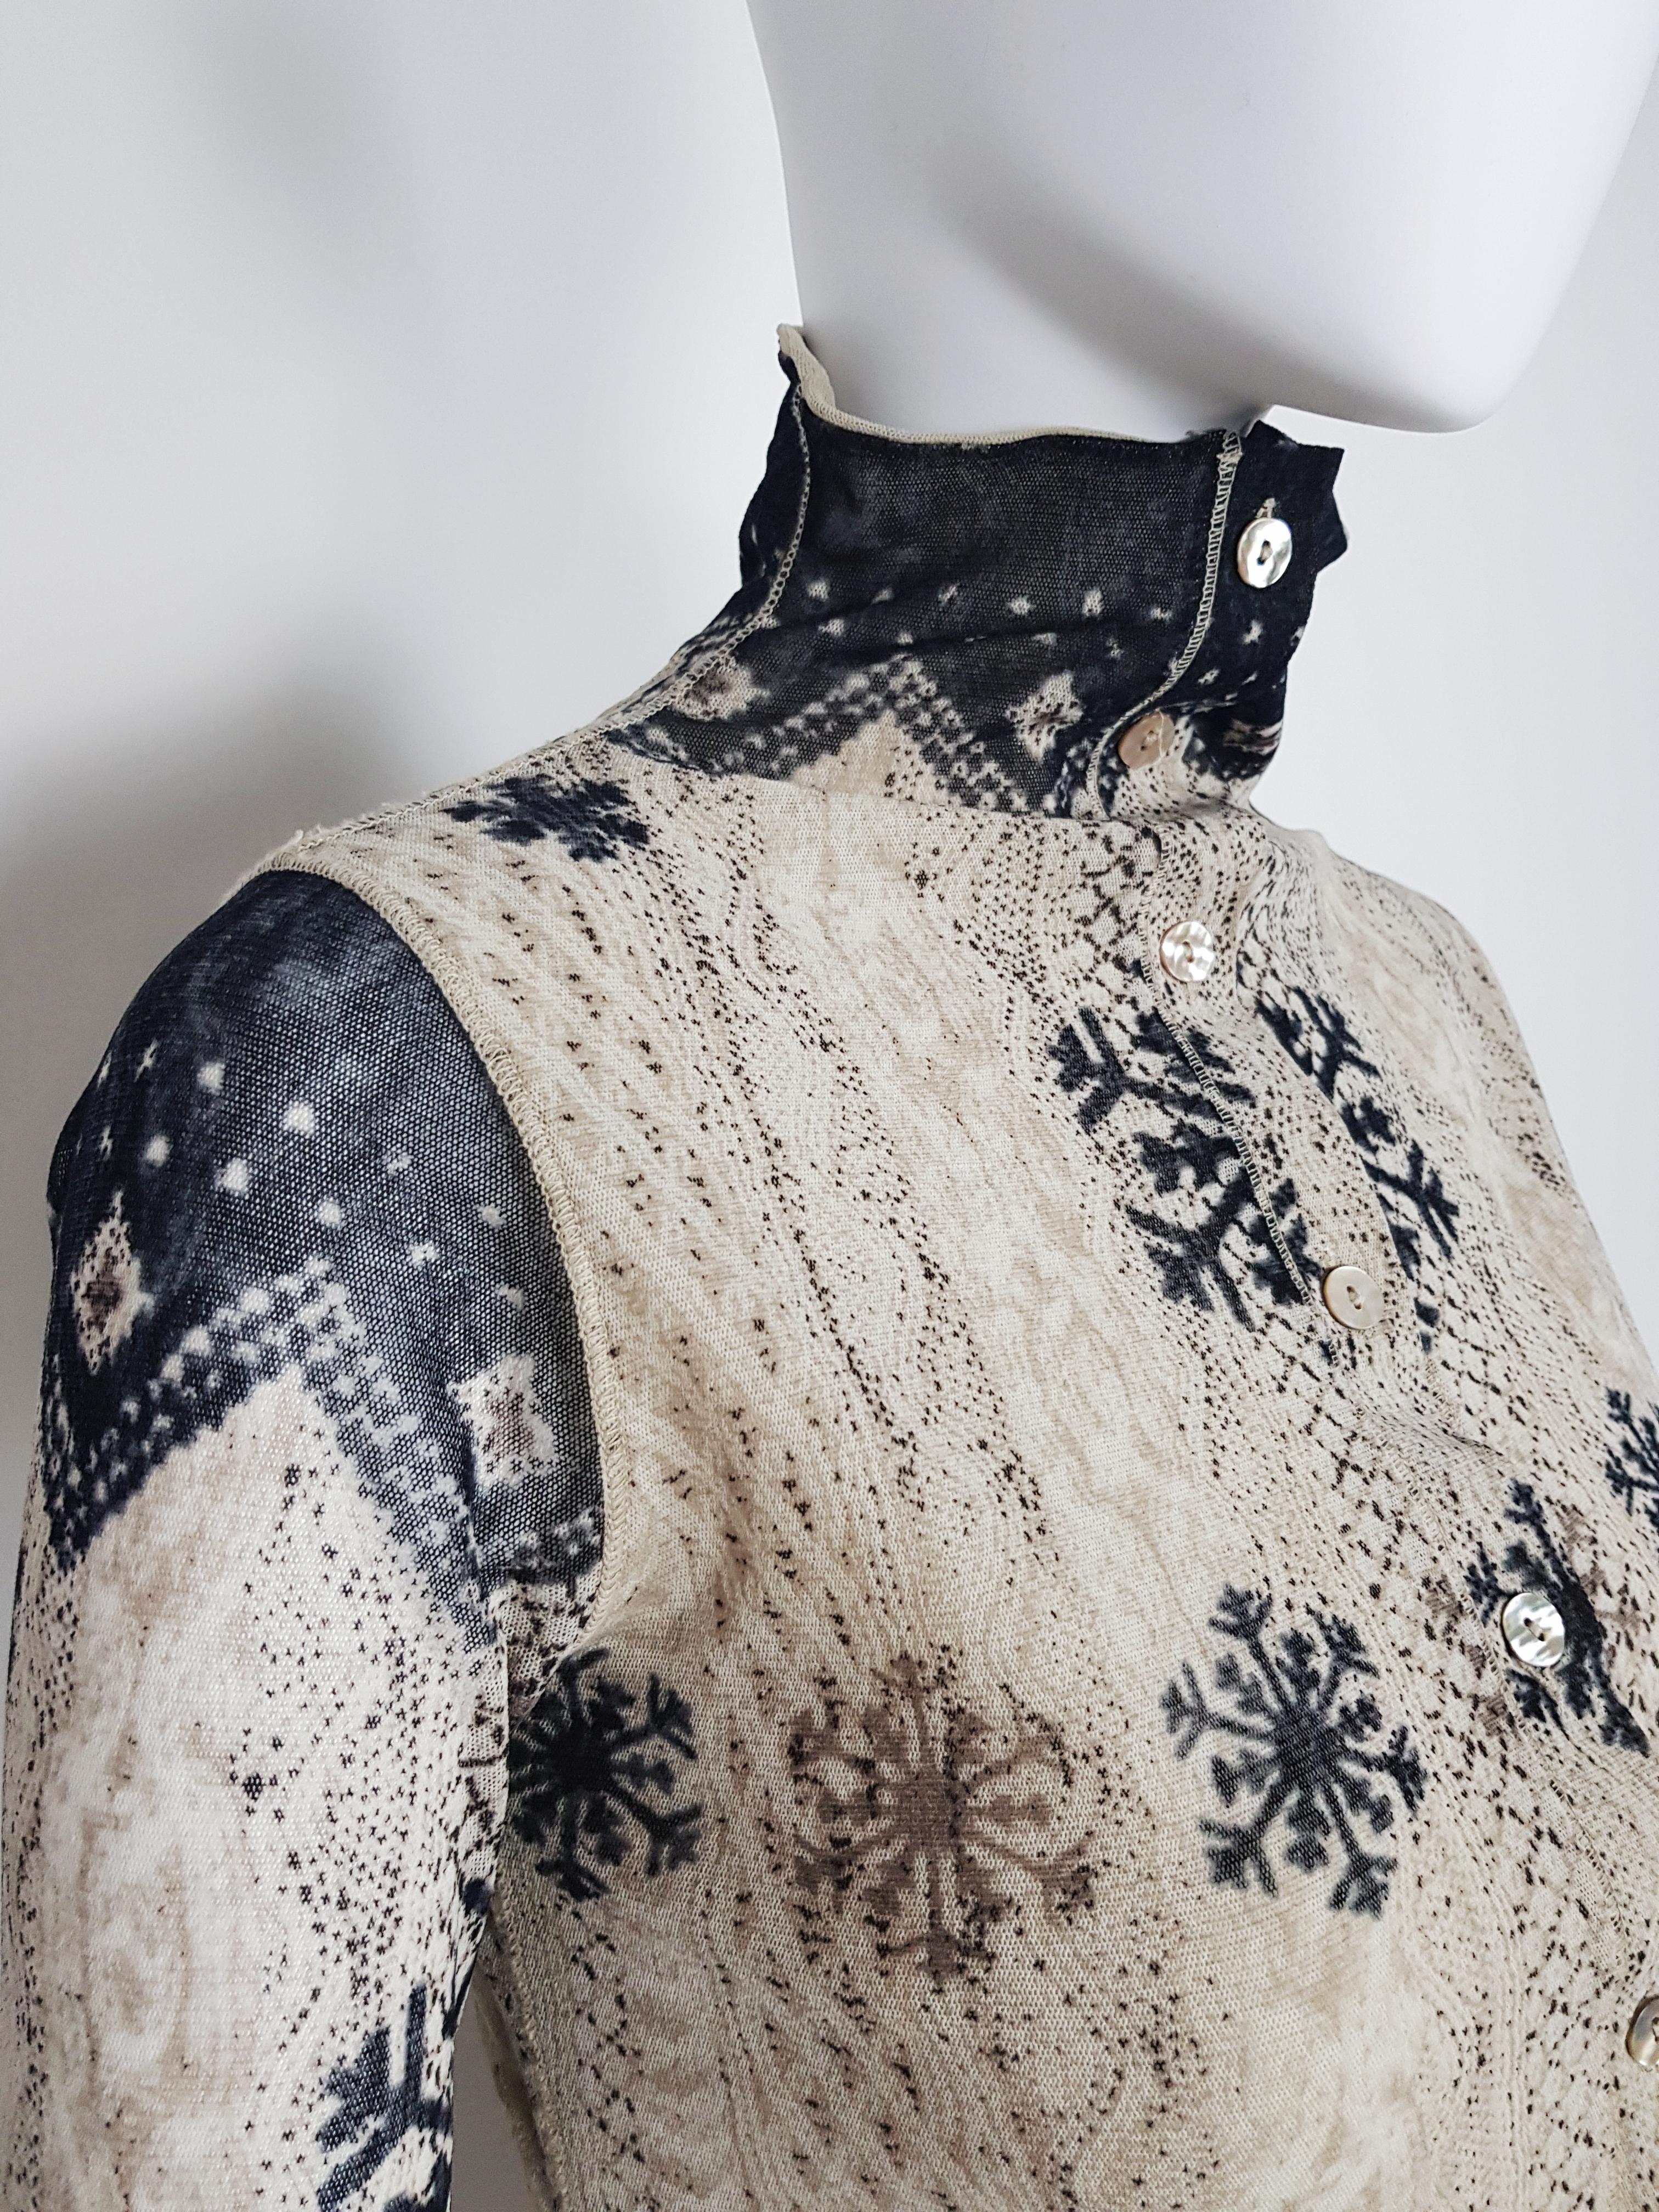 Jean-Paul Gaultier mesh print cardigan top featuring  acardigan knitted Nordic jumper trompe-l'oeil.

-Beige Cream Black colours
-Mother-of-pearl little buttons on frontal closure
-Doble mesh layering
-y2k style
-Very good conditions
-Fits size S to